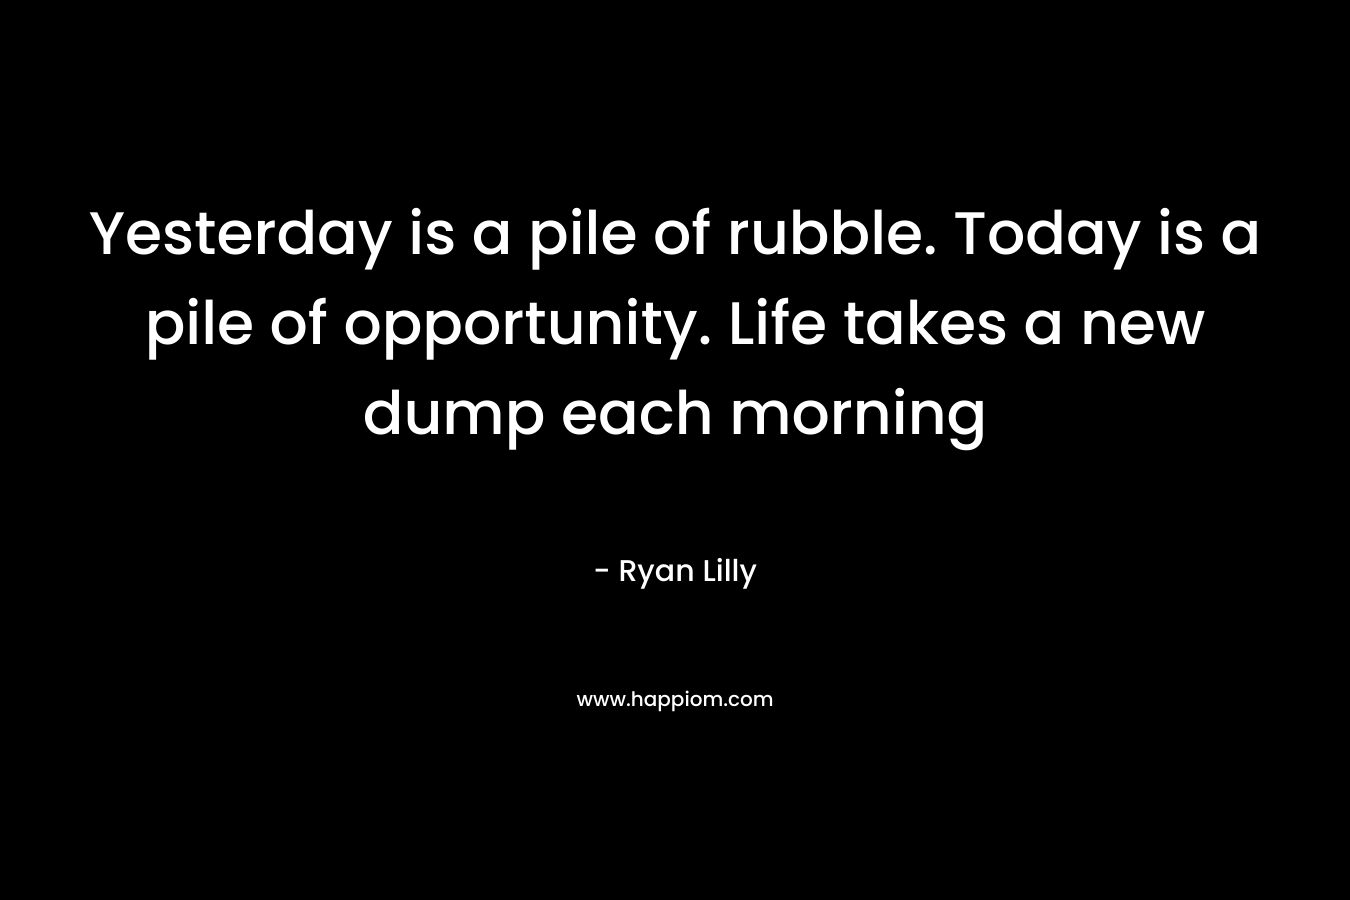 Yesterday is a pile of rubble. Today is a pile of opportunity. Life takes a new dump each morning – Ryan Lilly